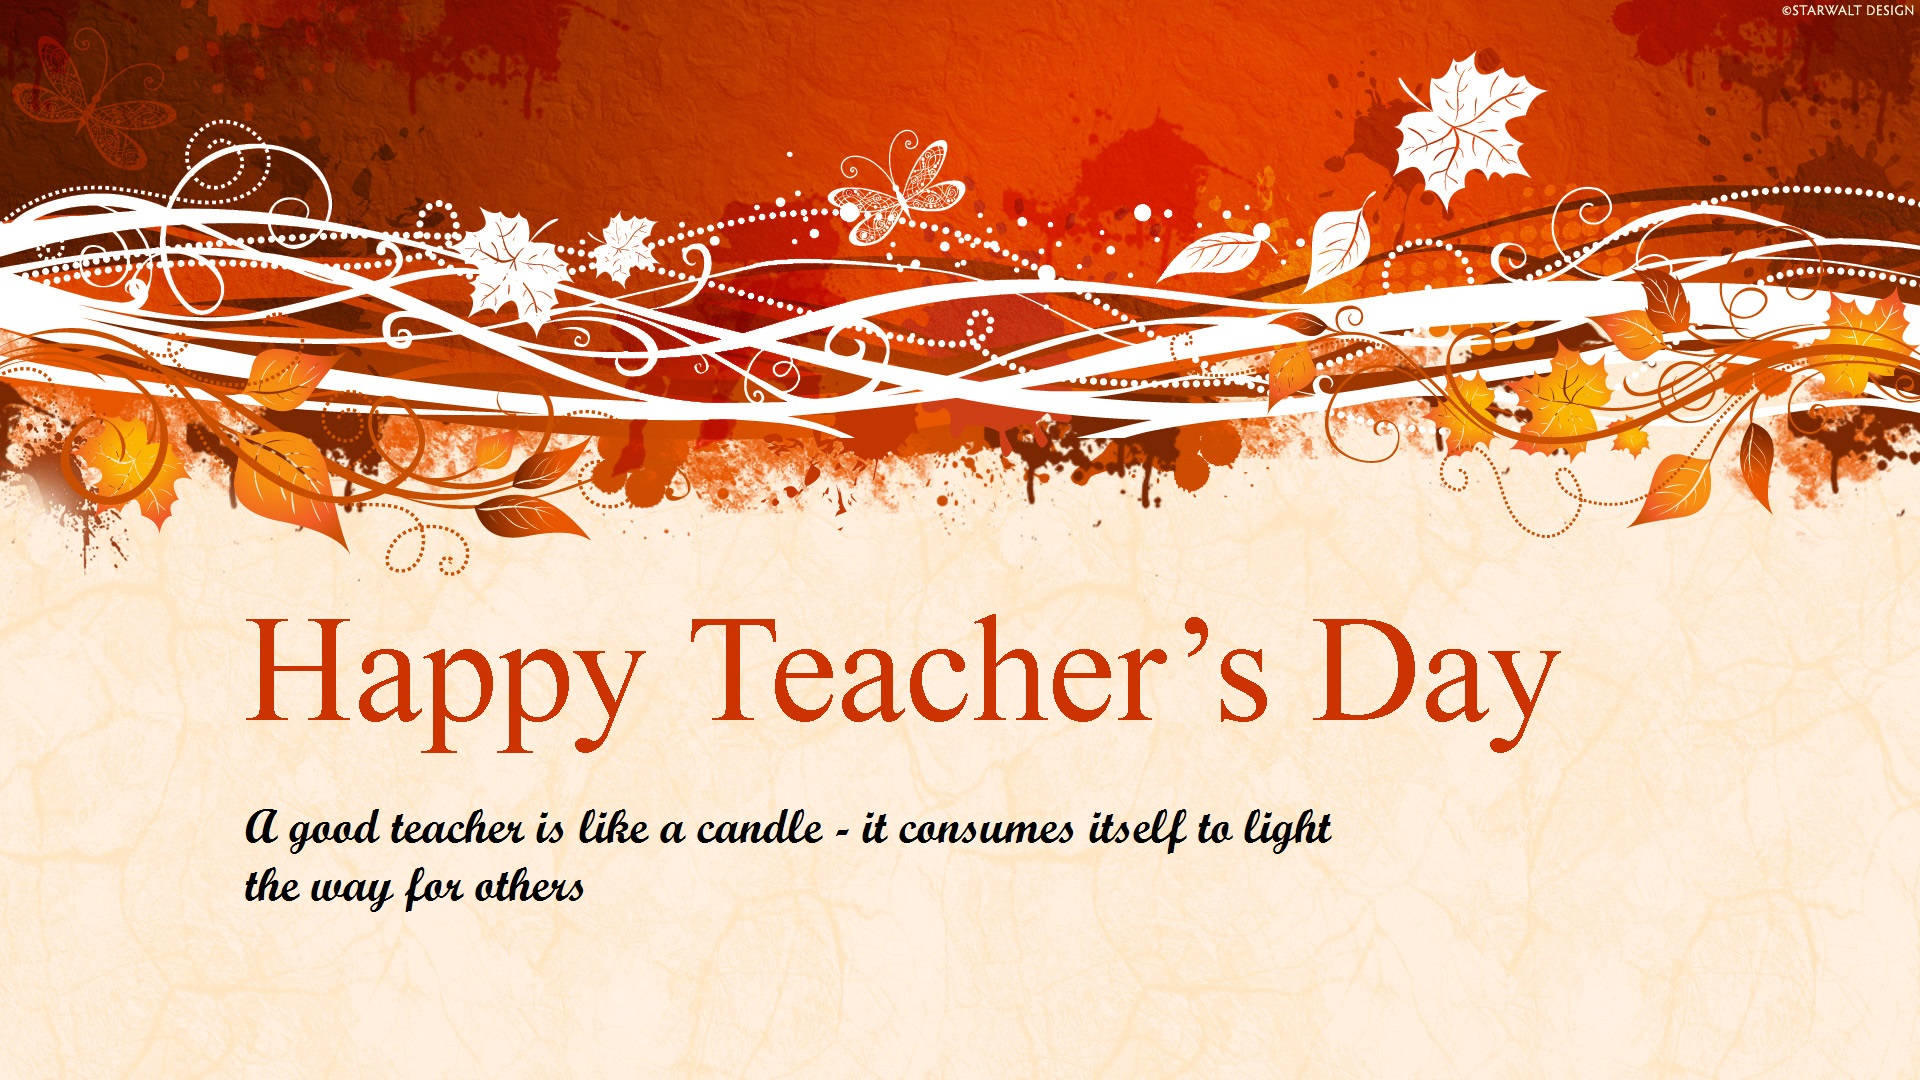 Happy Teachers' Day Candle Light